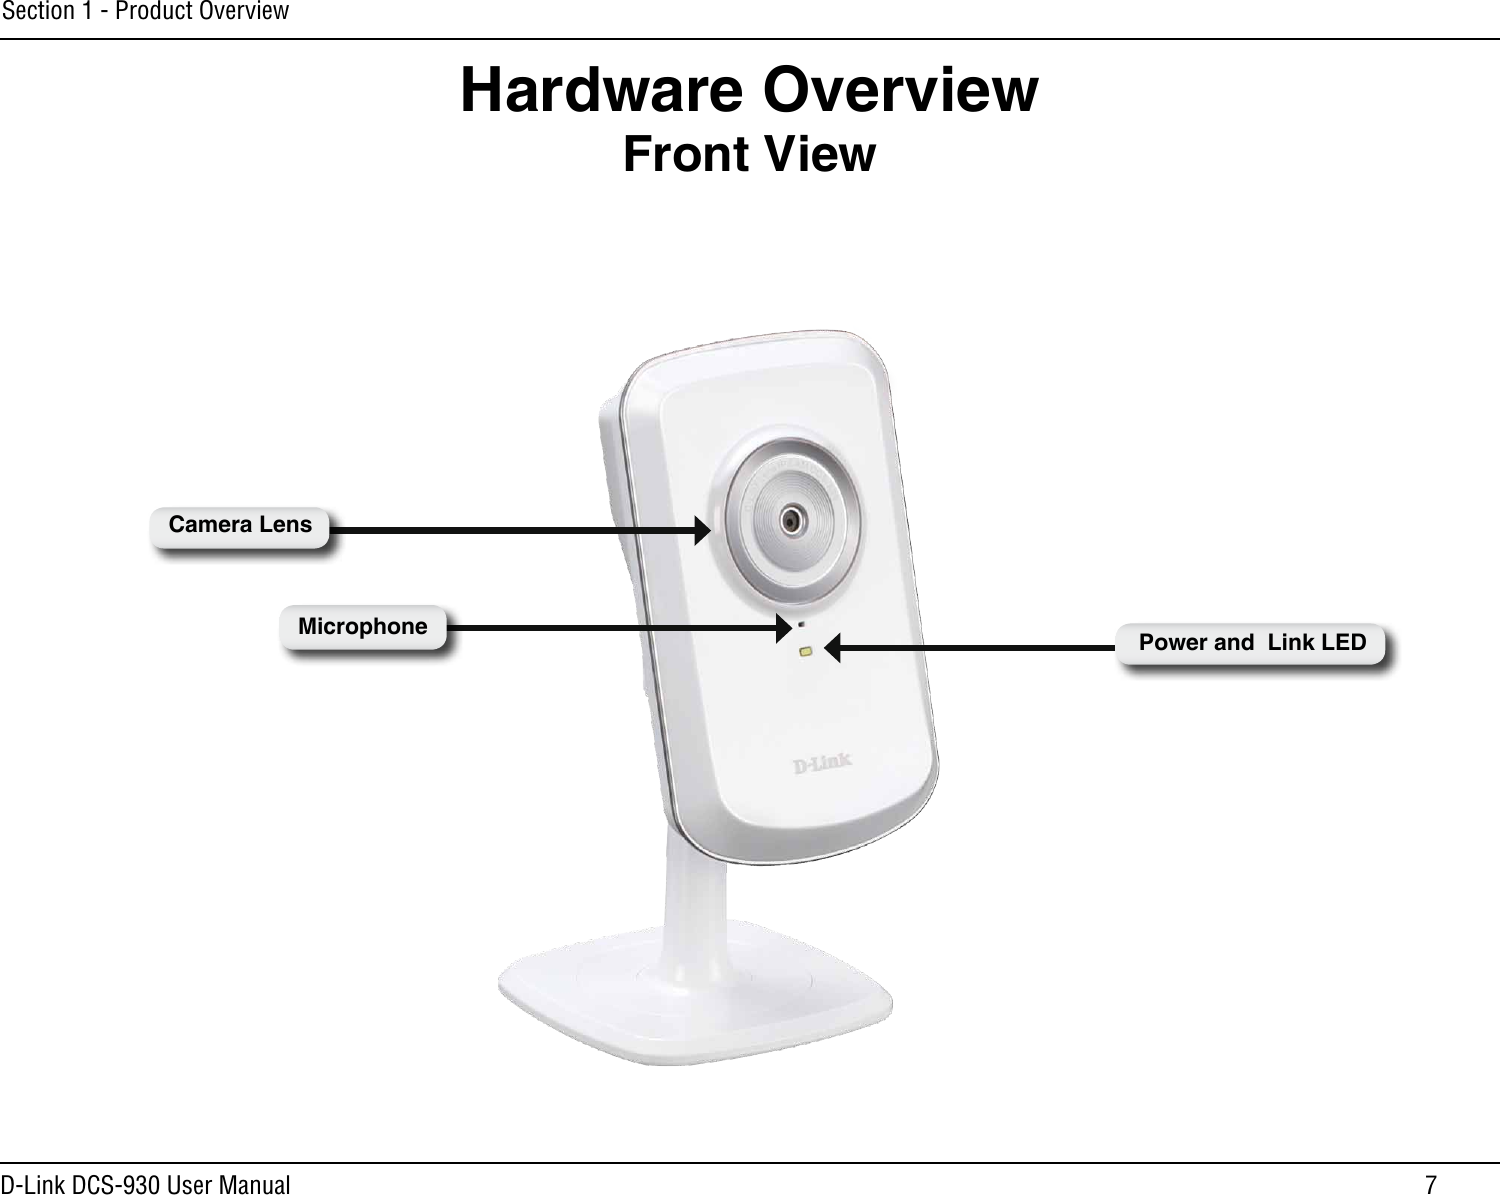 7D-Link DCS-930 User ManualSection 1 - Product OverviewHardware OverviewFront ViewPower and  Link LEDCamera LensMicrophone